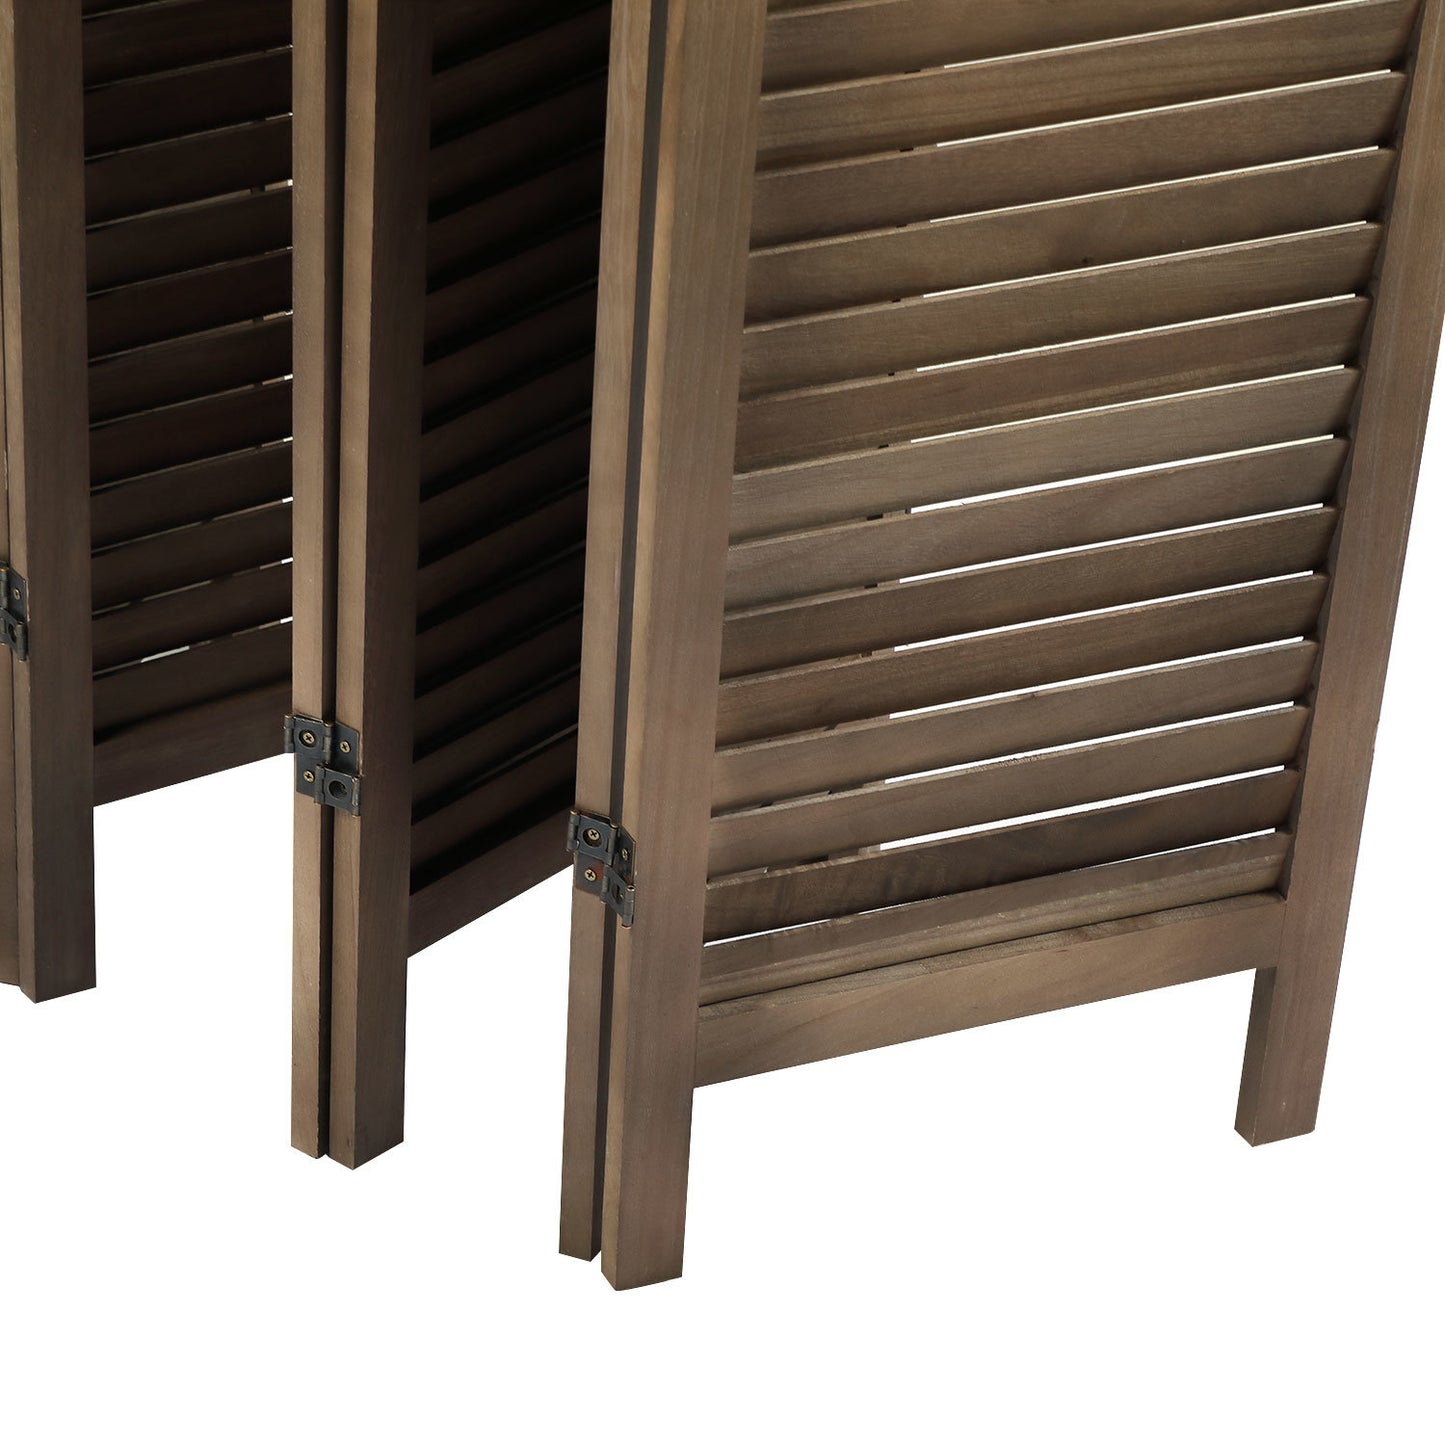 Sycamore wood 8 Panel Screen Folding Louvered Room Divider